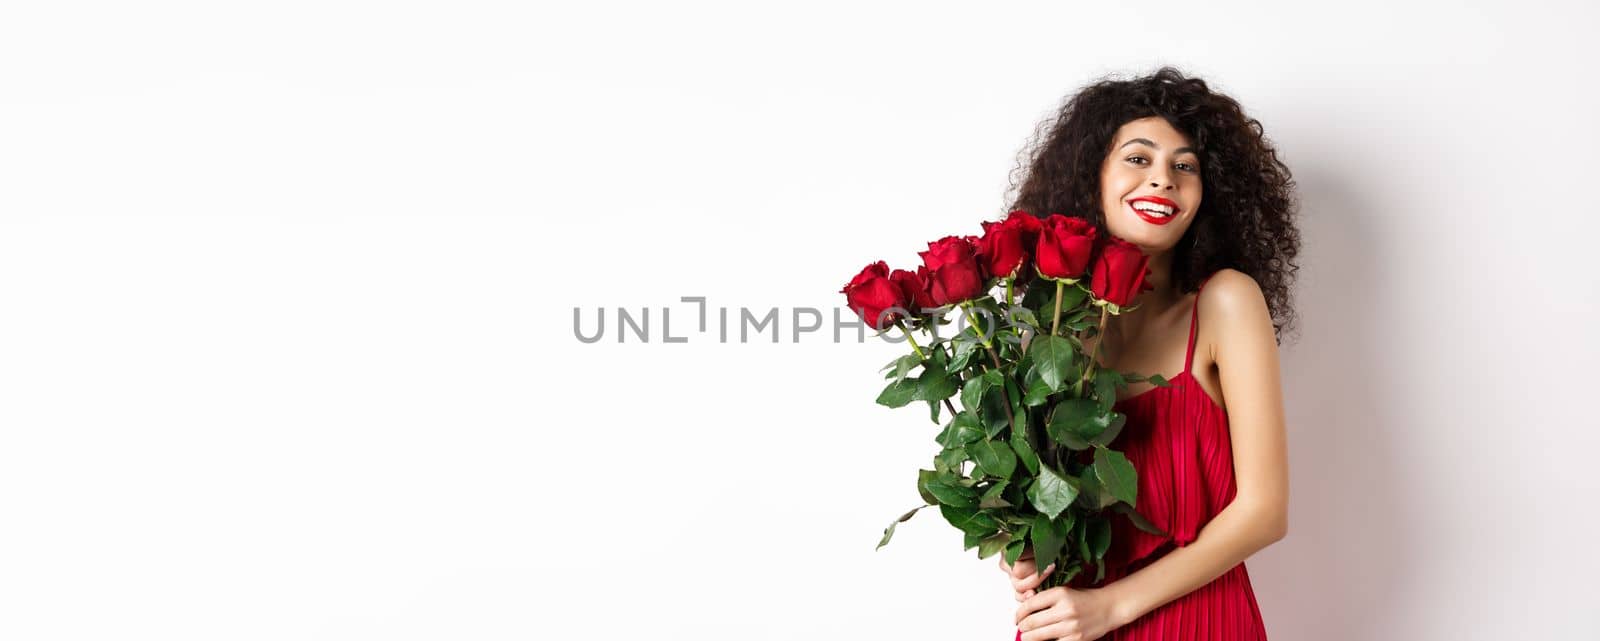 Romantic lady with curly hair and fashionable dress, holding bouquet of red roses and smiling, standing happy on white background.